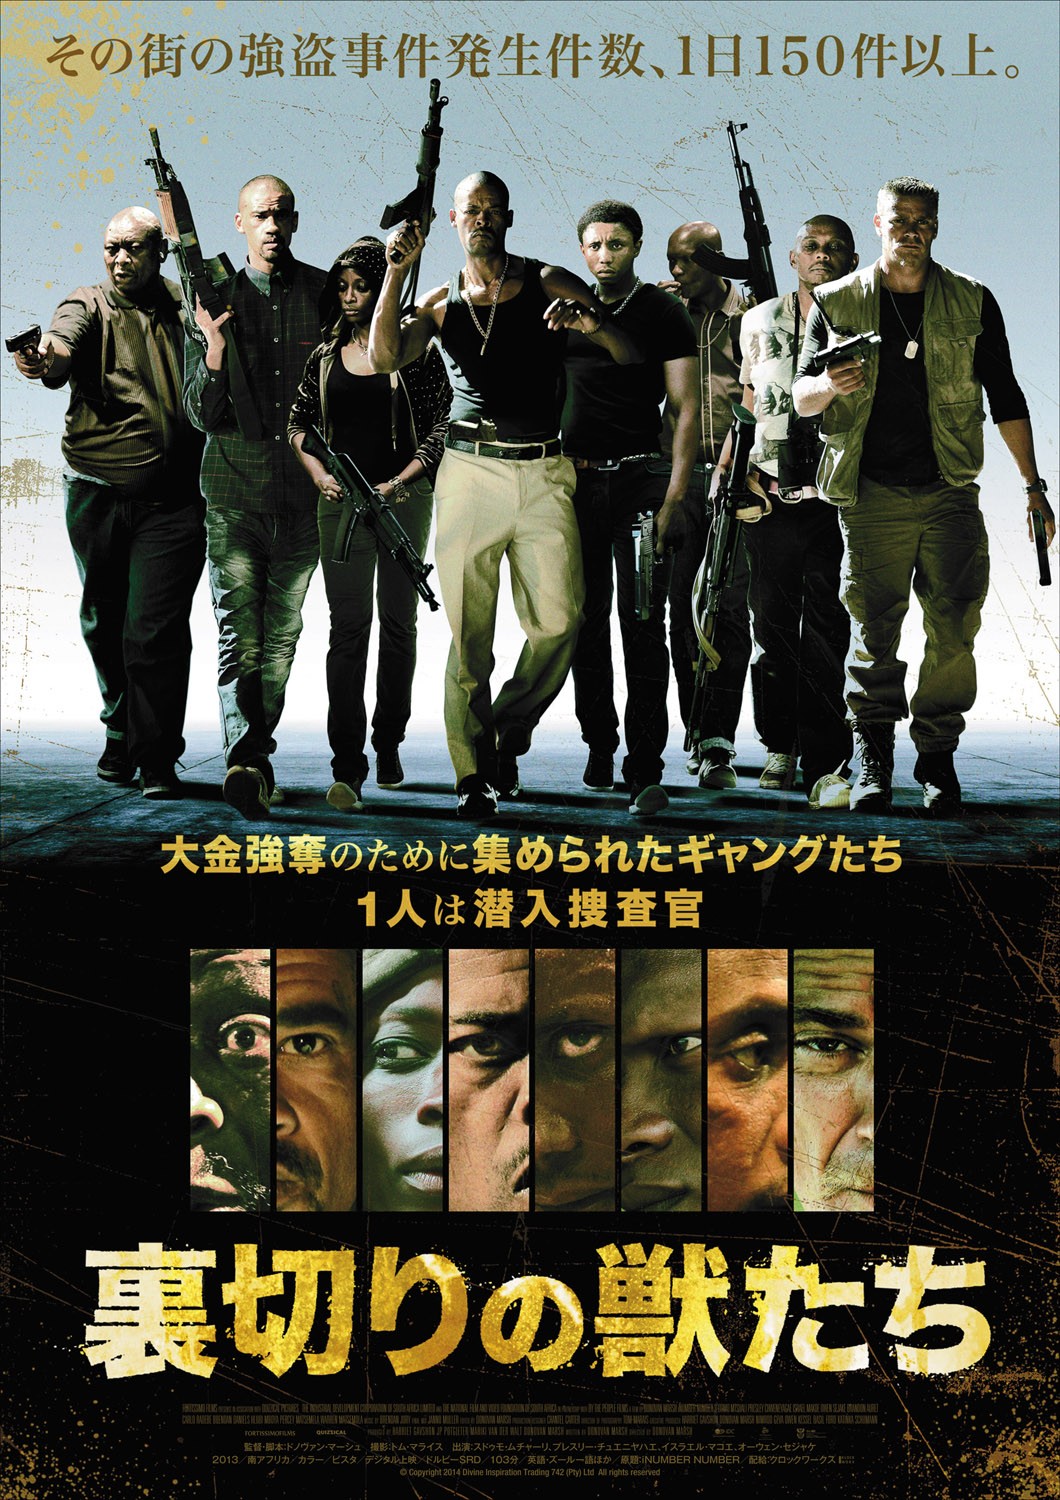 Extra Large Movie Poster Image for iNumber Number (#2 of 2)